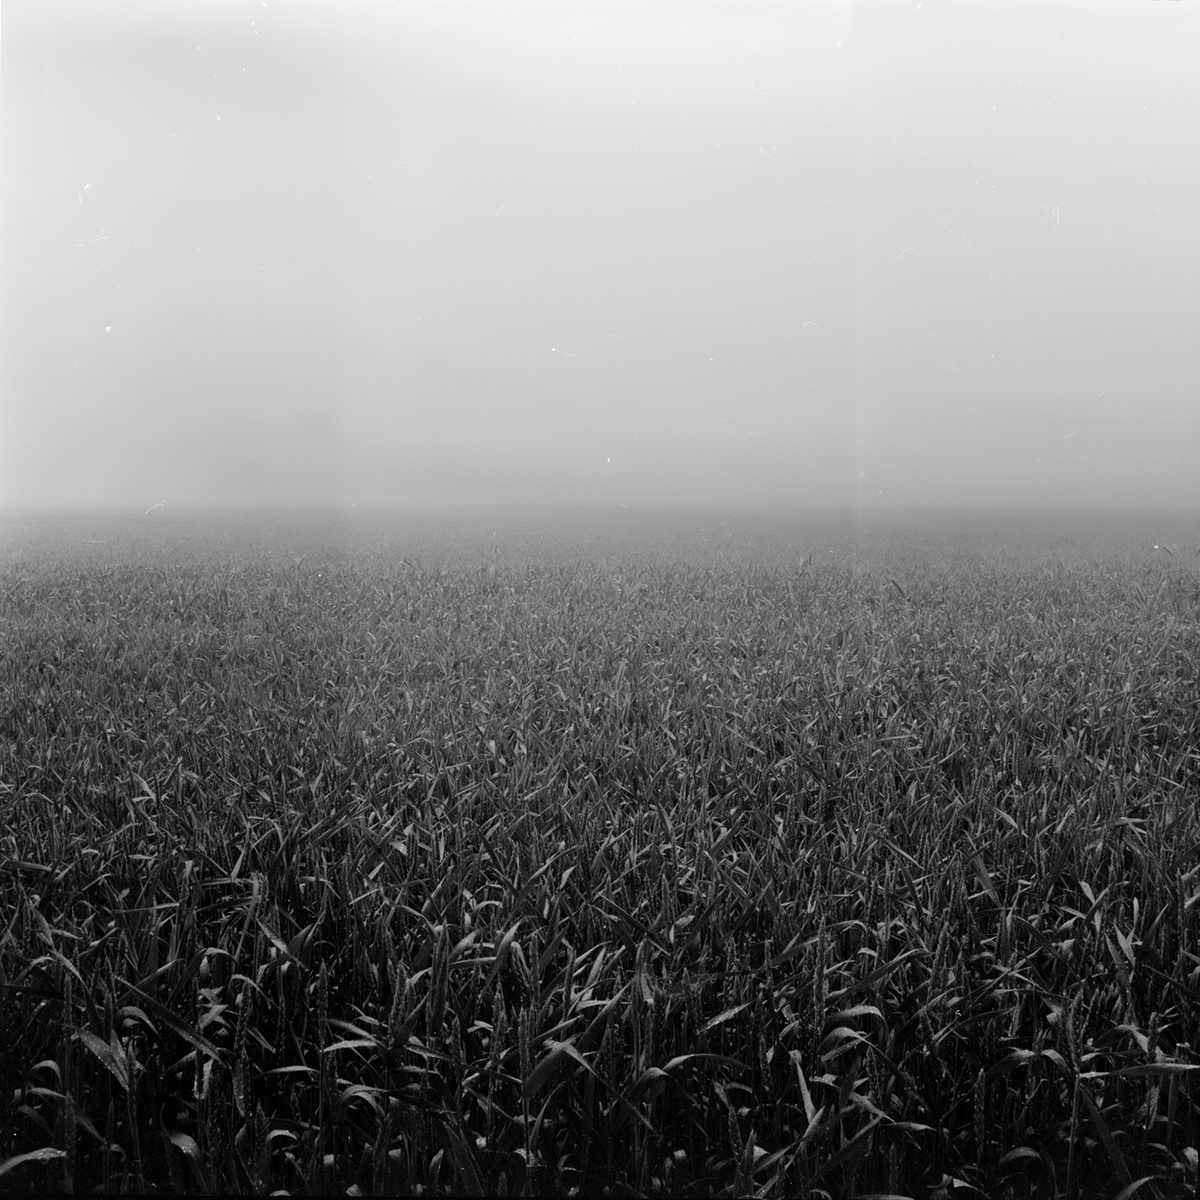 b&w bw black and white photo fog grain square 6x6 120mm 120 mm abstract atmosphere lens carl zeiss scan